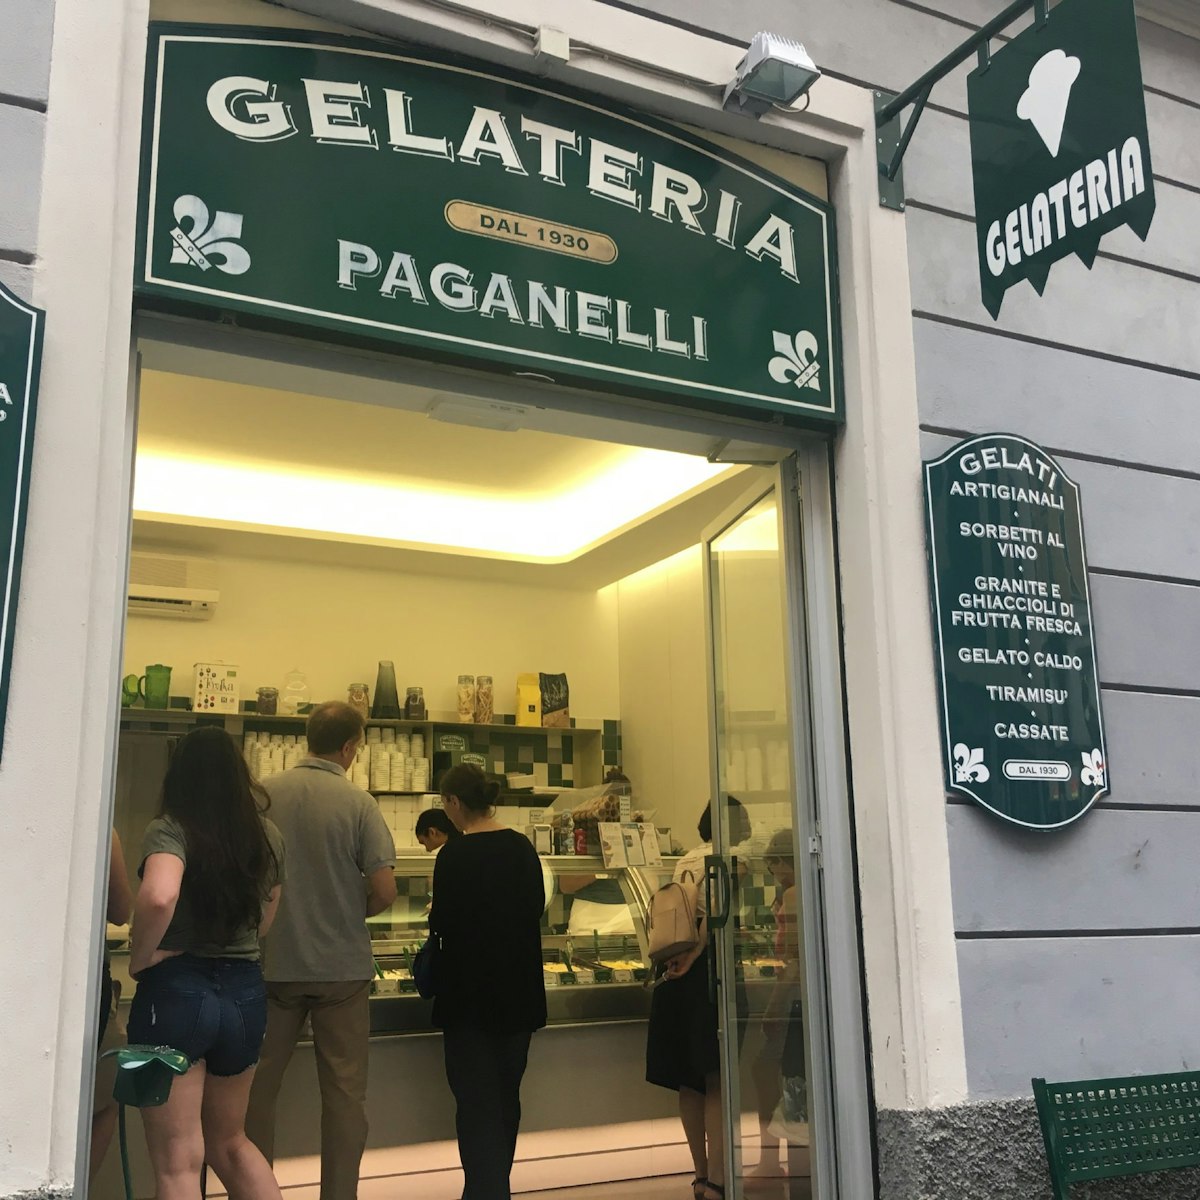 Exterior of Gelateria Paganelli